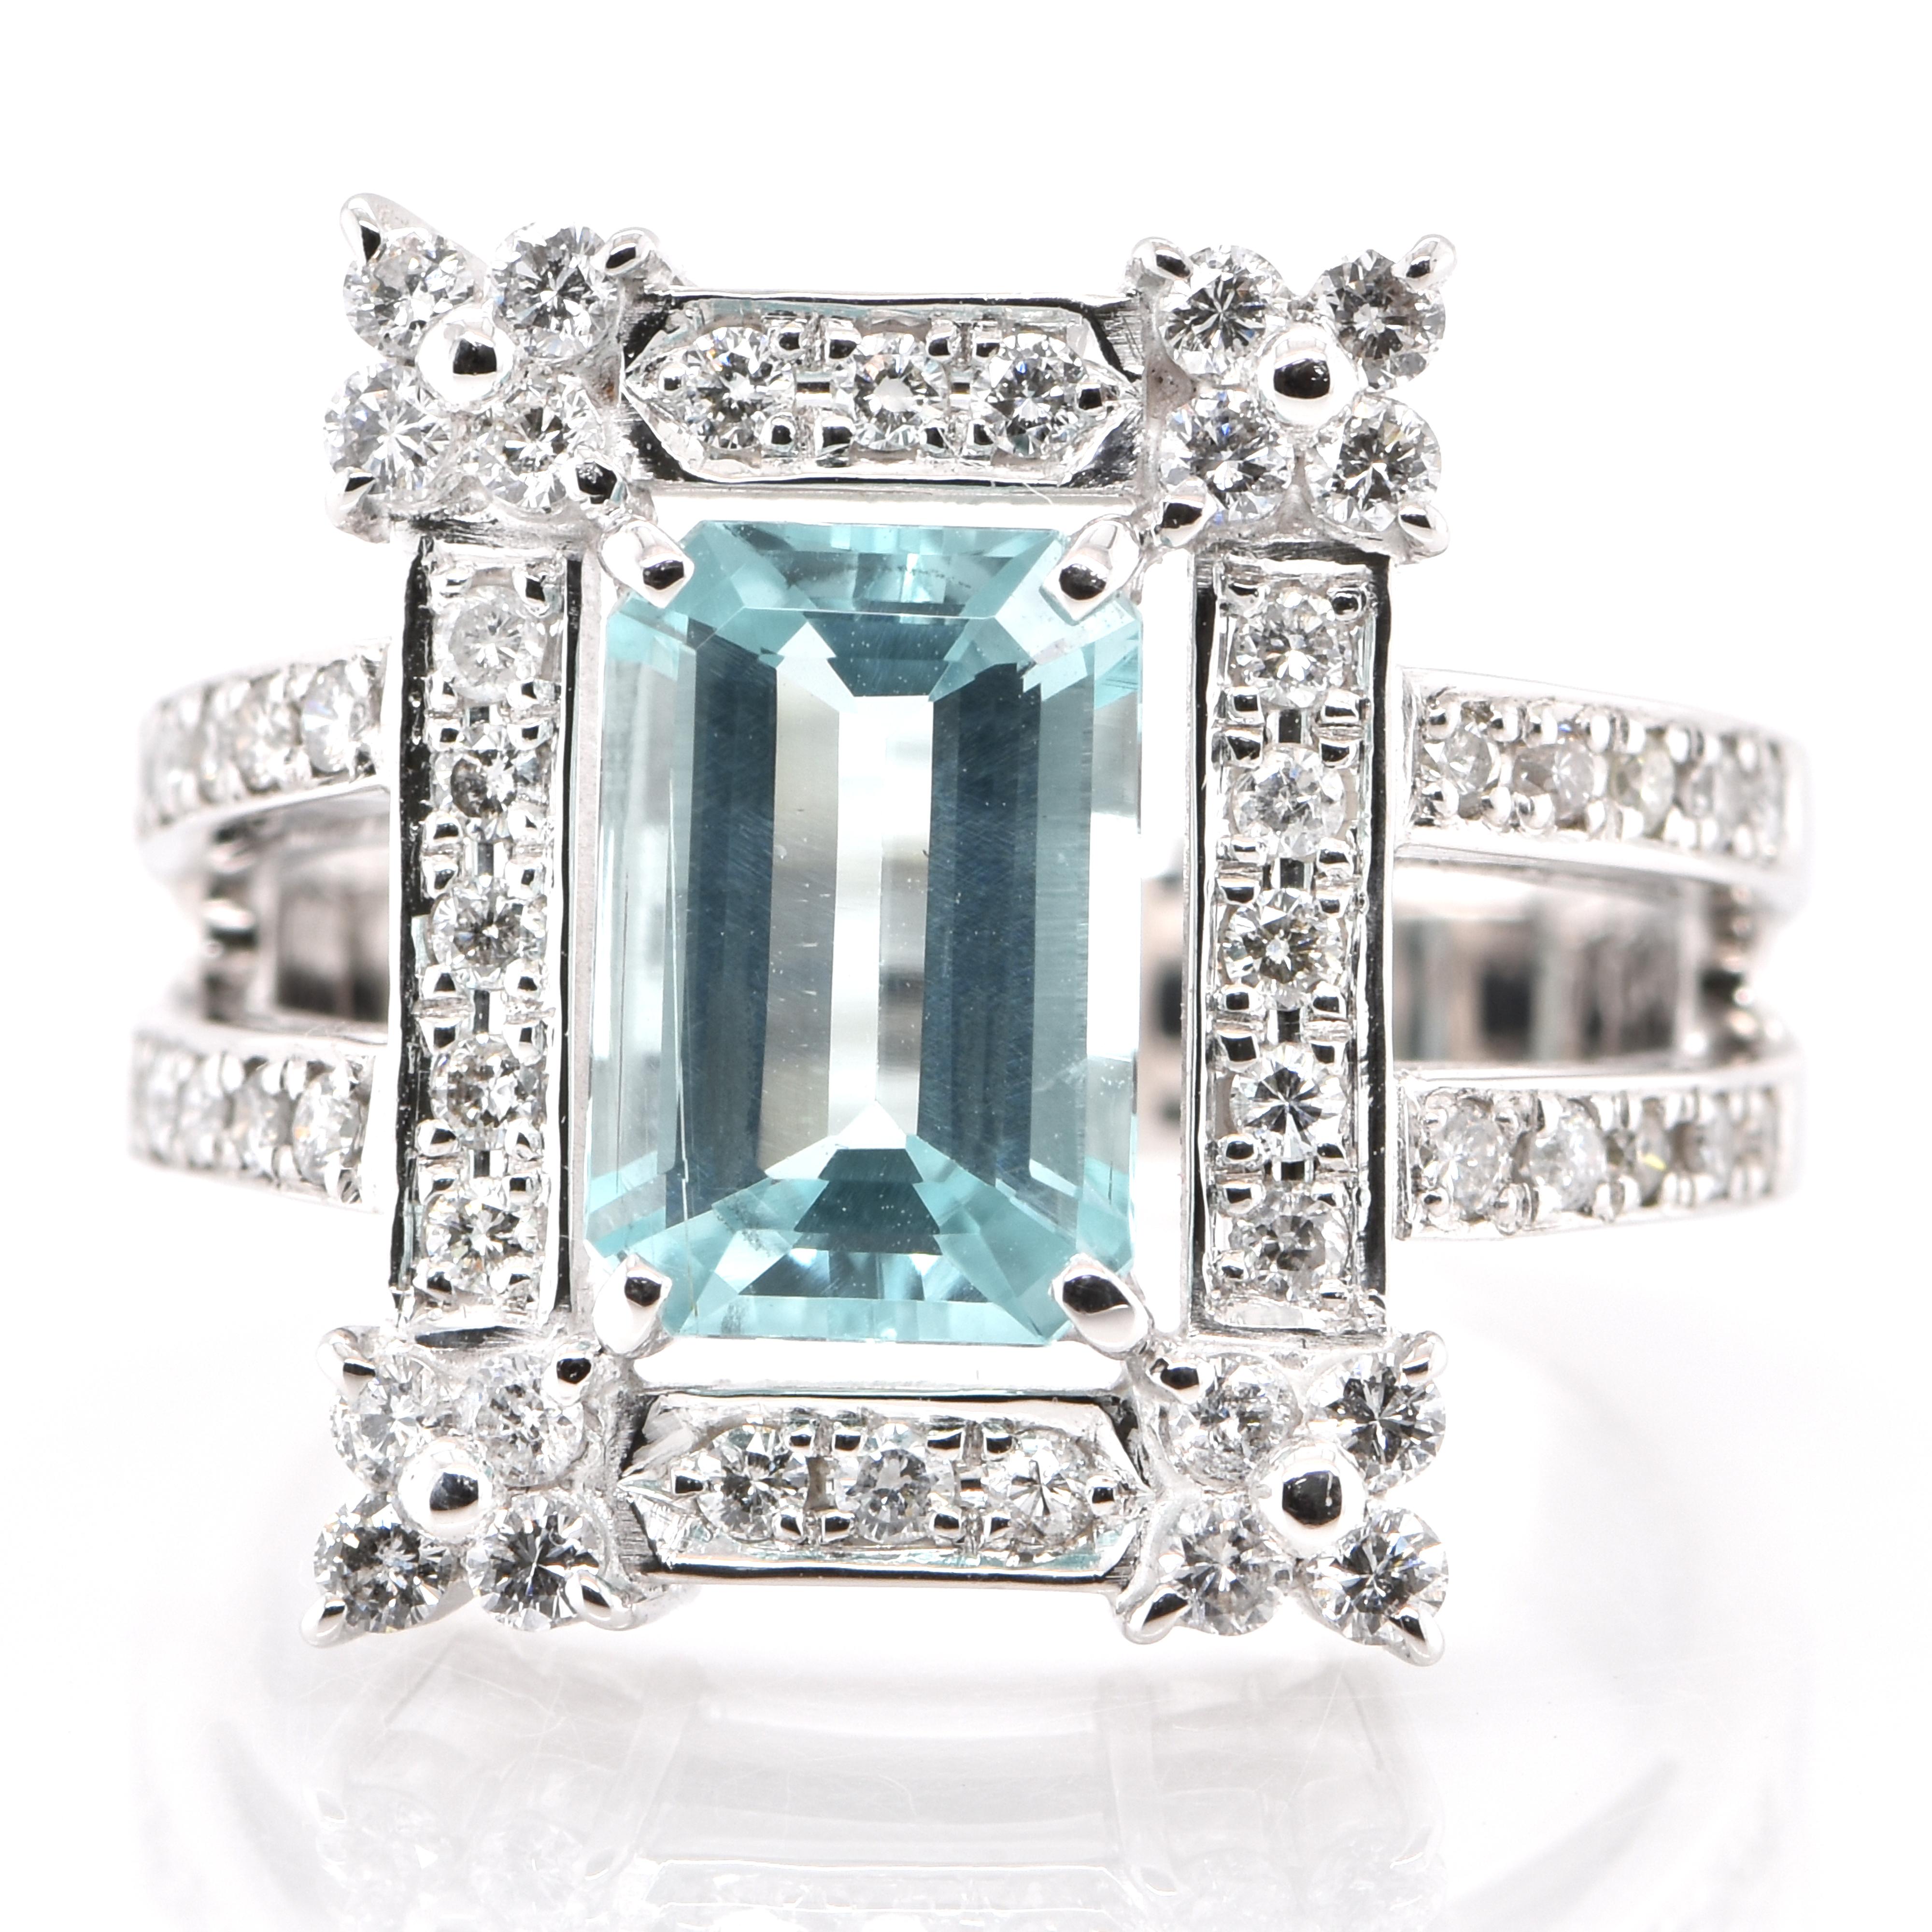 A beautiful ring featuring a 2.38 Carat Natural Paraiba Tourmaline and 0.493 Carats of Diamond Accents set in Platinum. Paraiba Tourmalines were only discovered 30 years ago in the Brazilian state of the same name- Paraiba. Since then they have